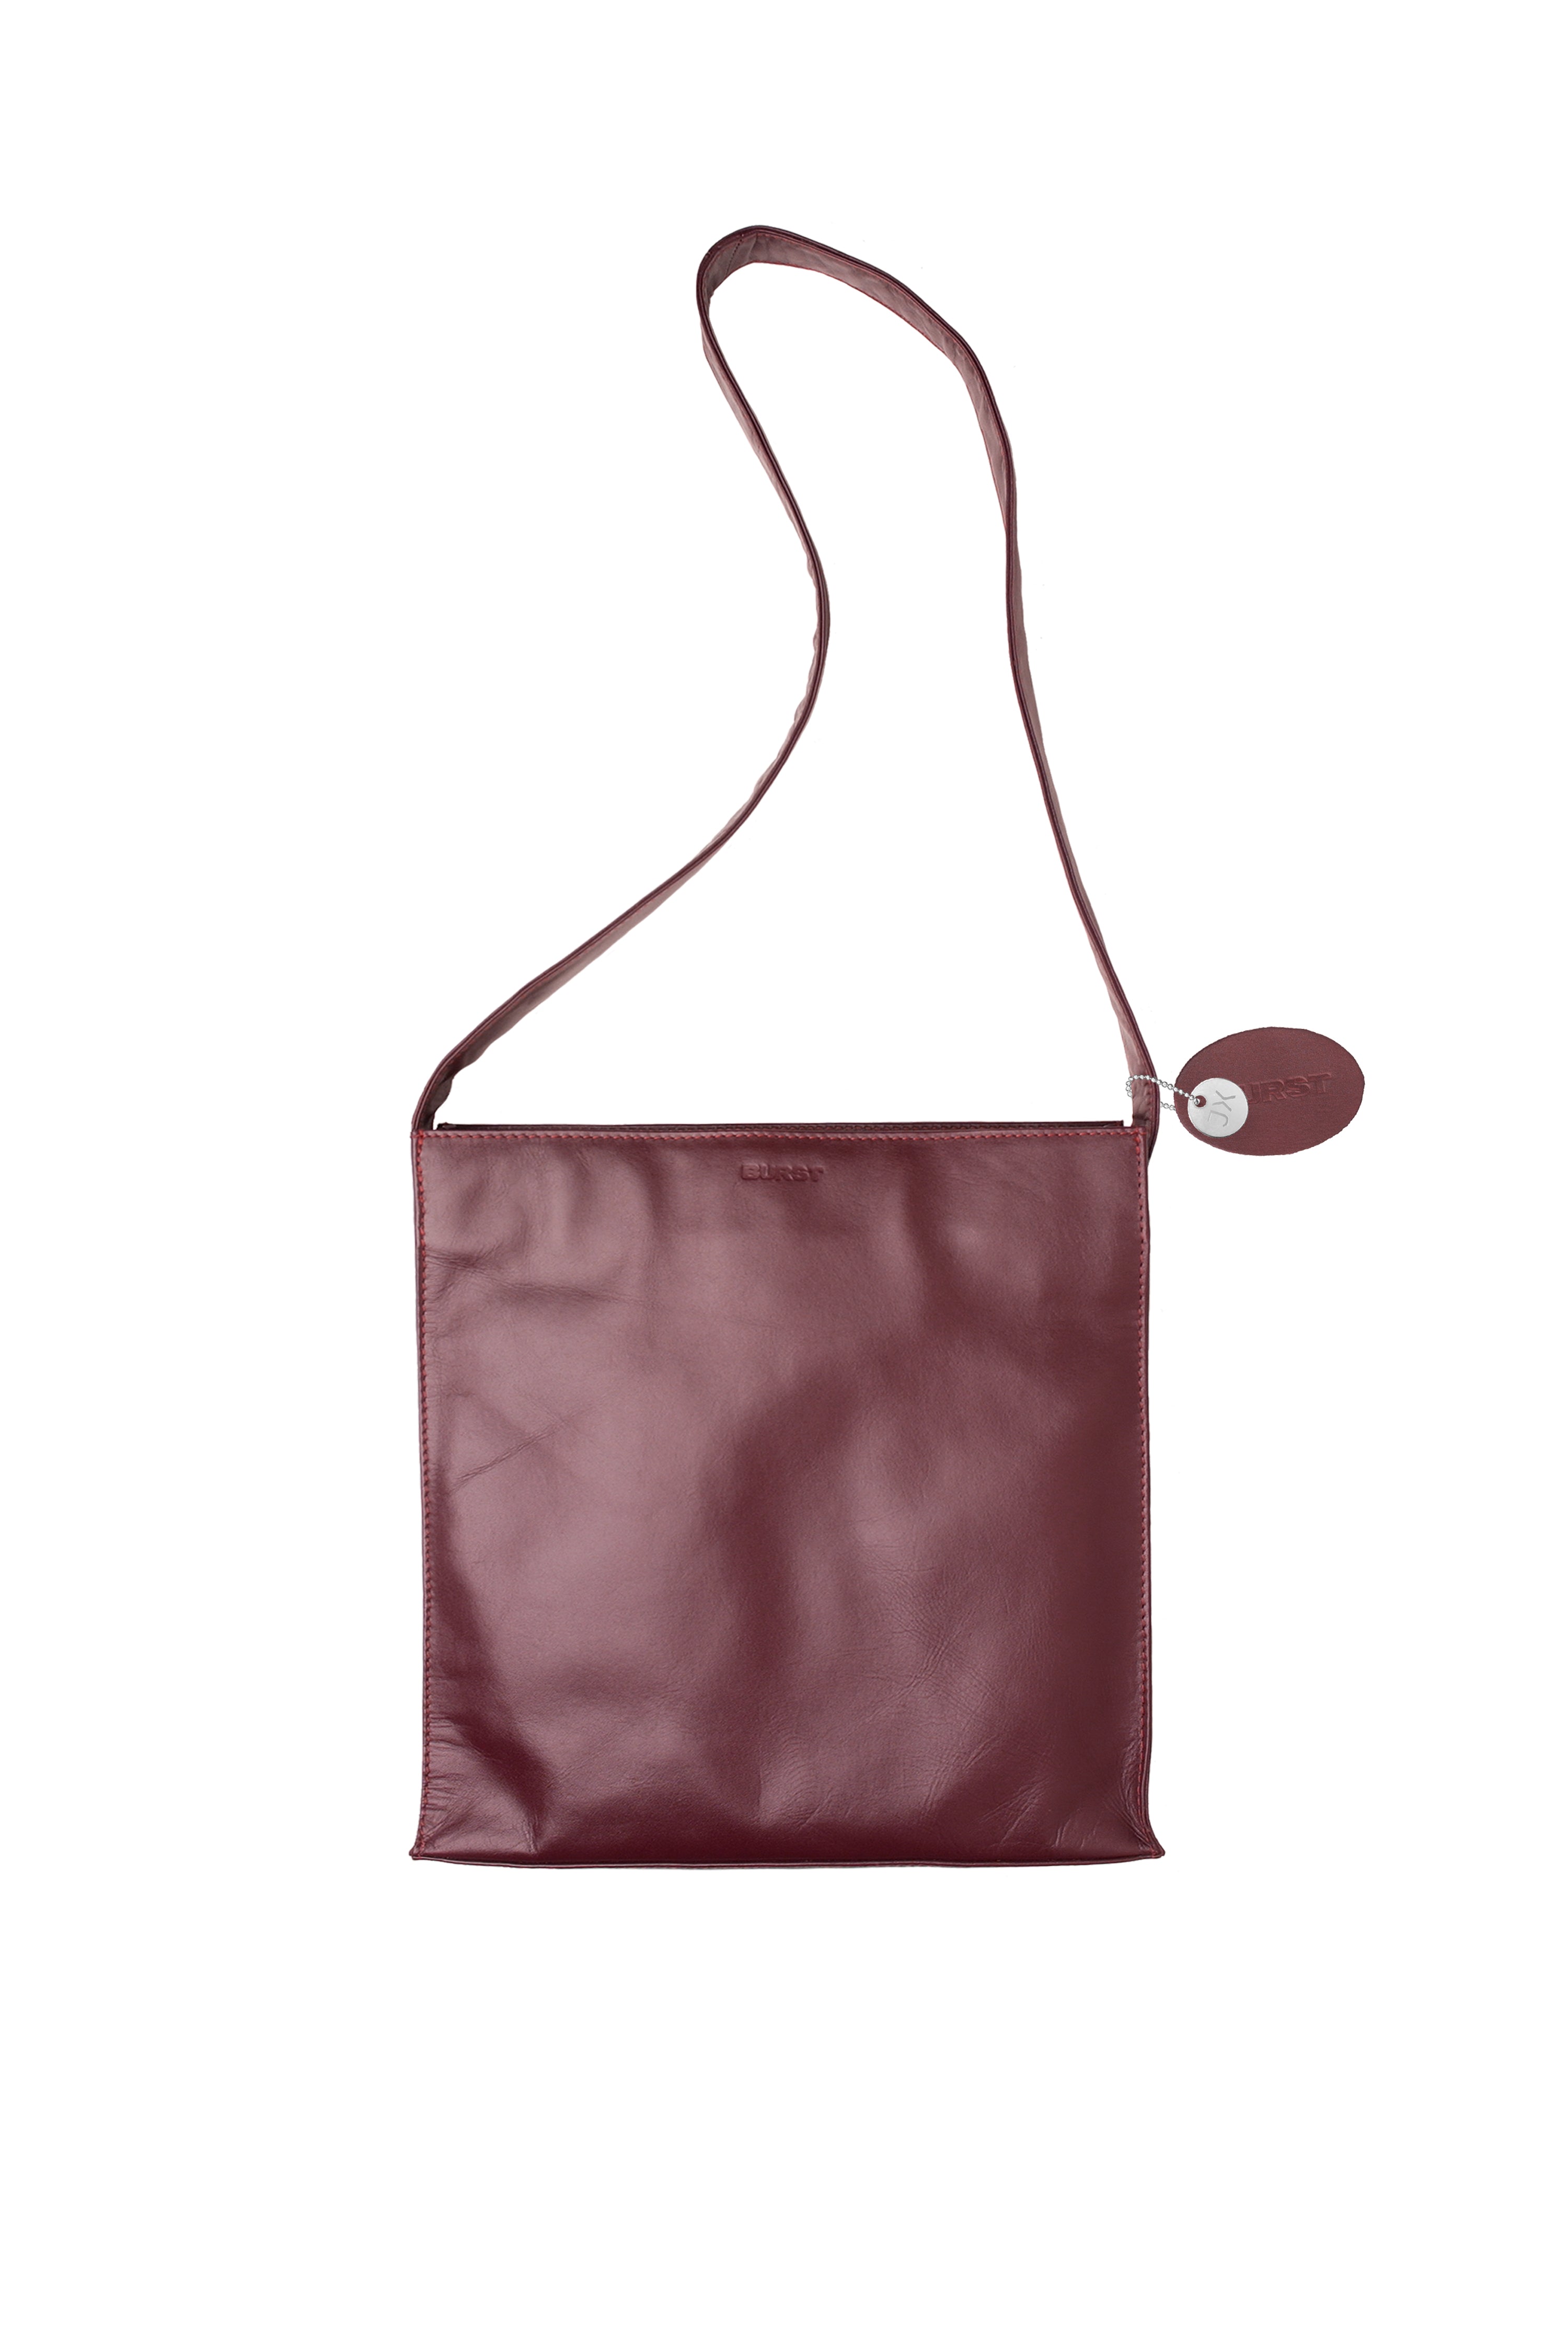 Caramel finished leather large cross body bag. Chic wide strap. Deep raspberry red toned brown with vivid Pink Grapefruit lining and stitch.